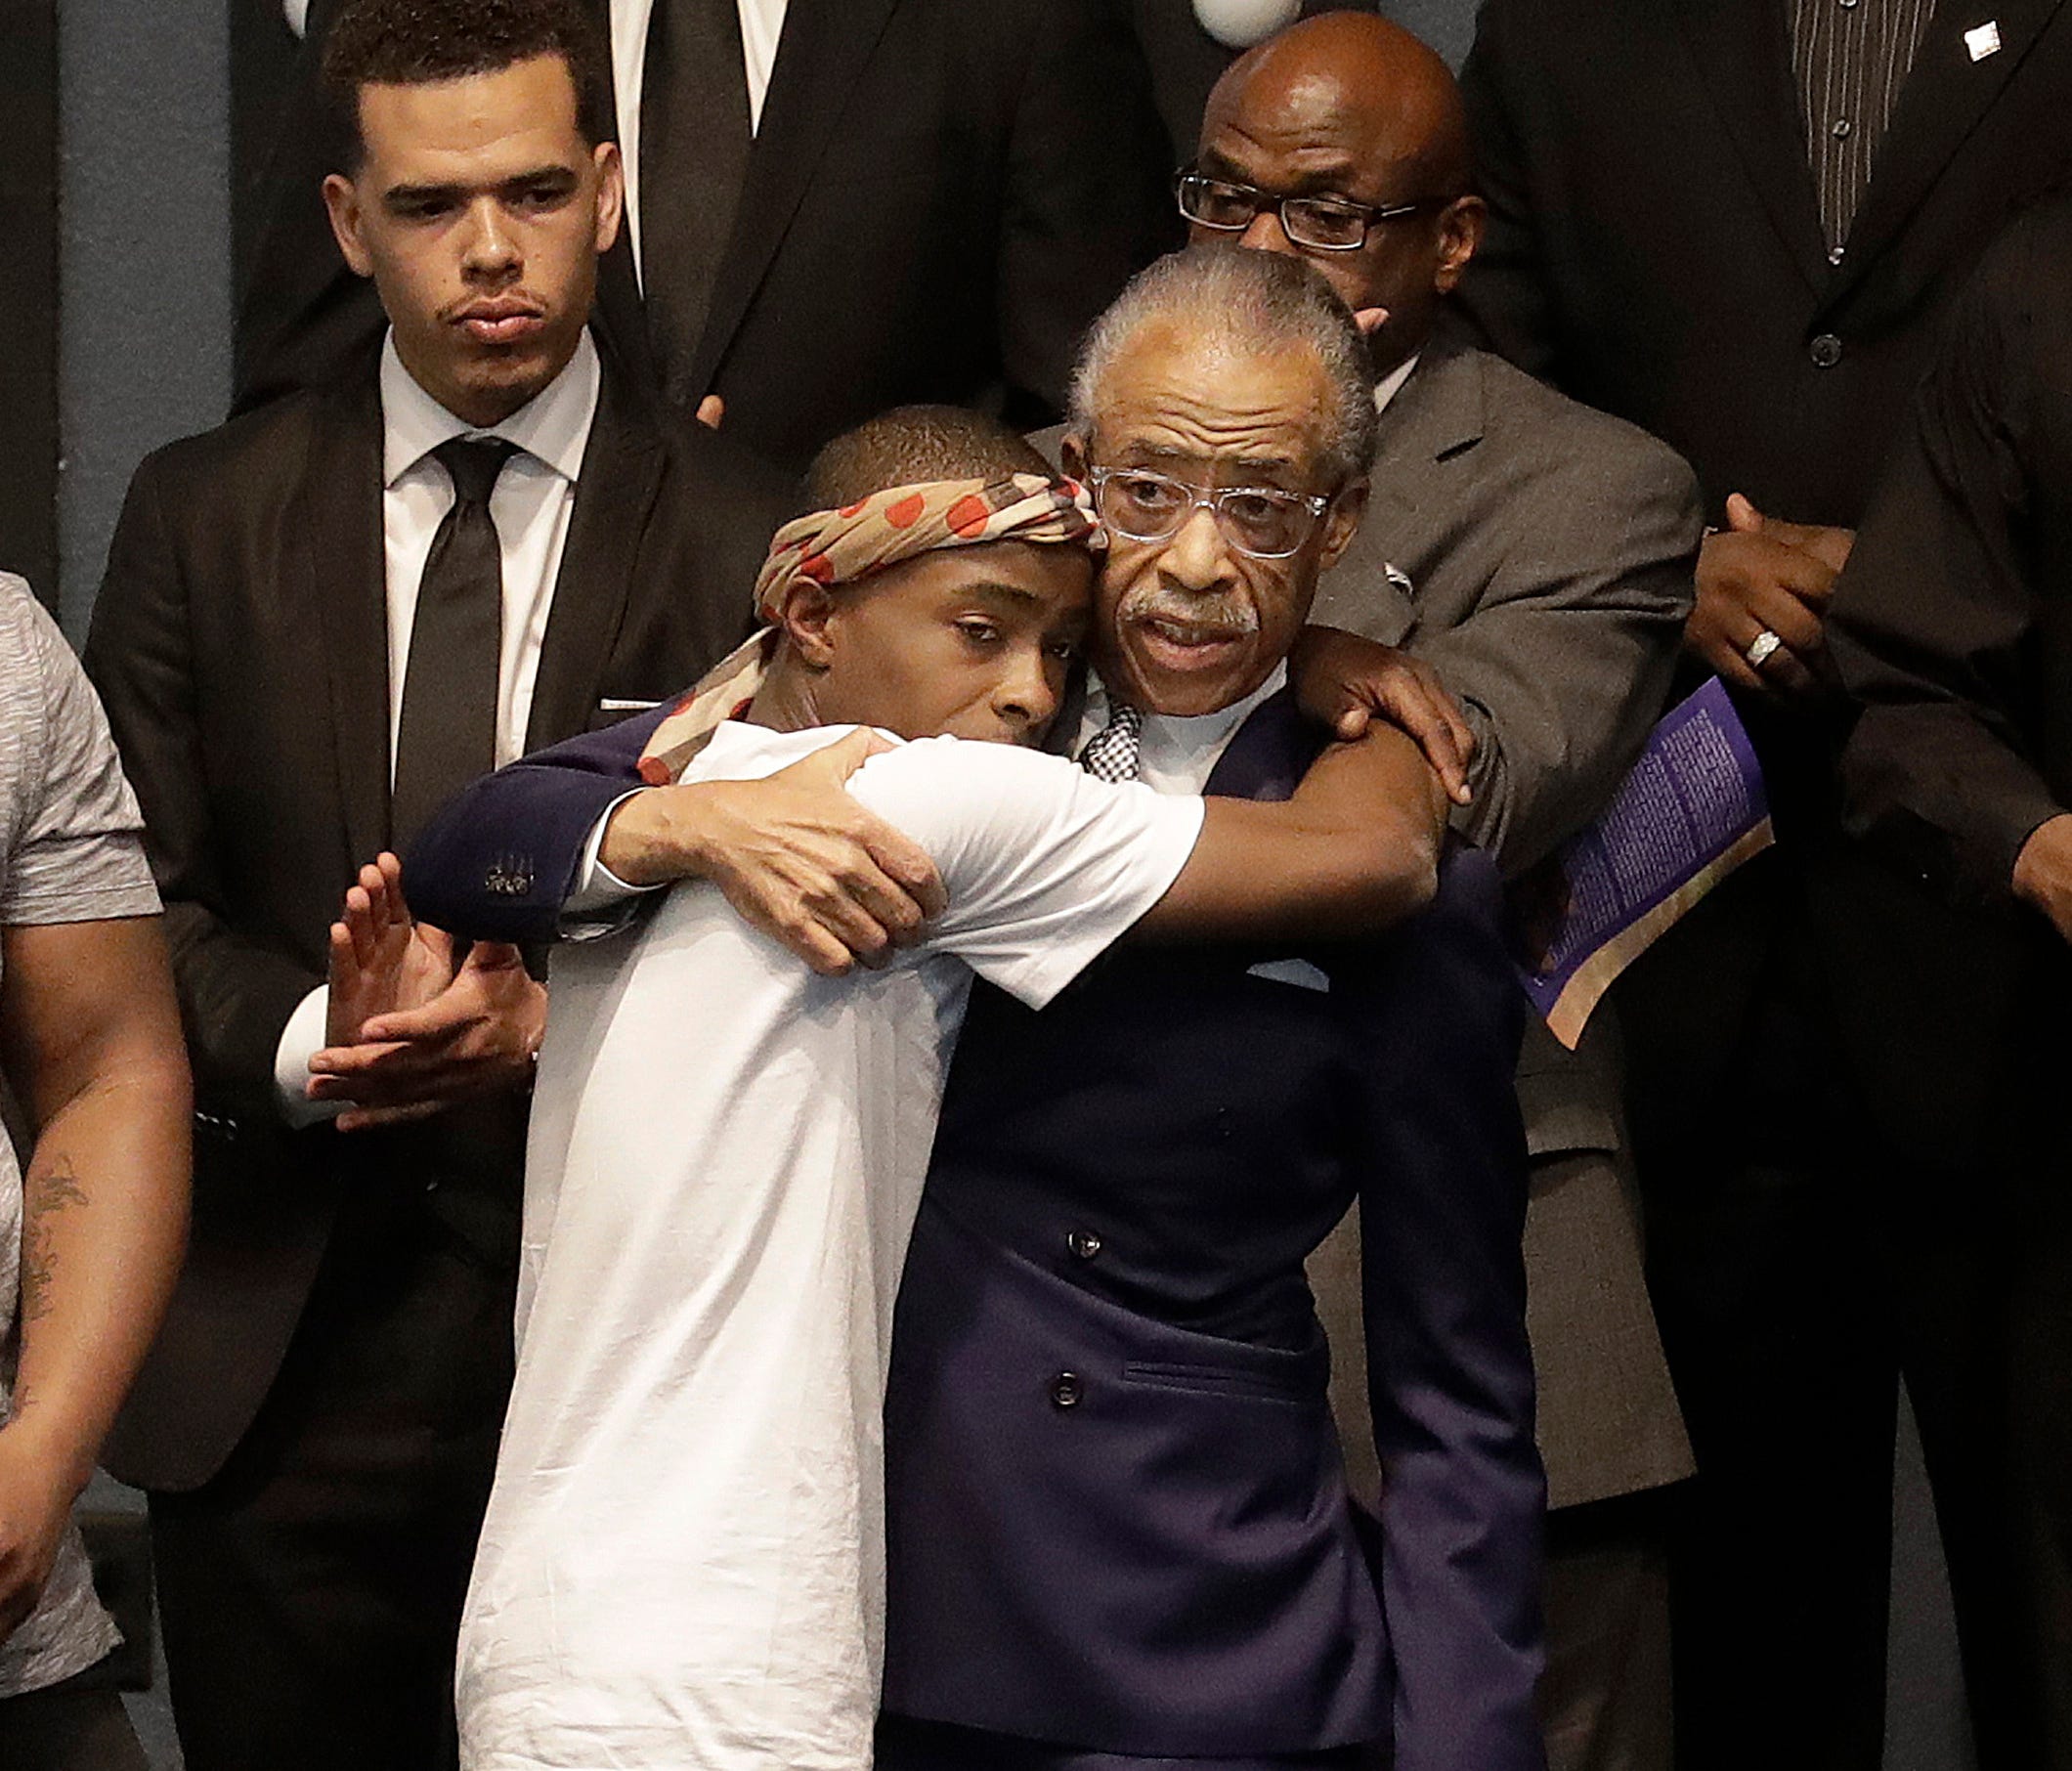 Rev. Al Sharpton (right) hugs Stevante Clark during the funeral services for police shooting victim Stephon Clark at Bayside Of South Sacramento Church in Sacramento, Calif.